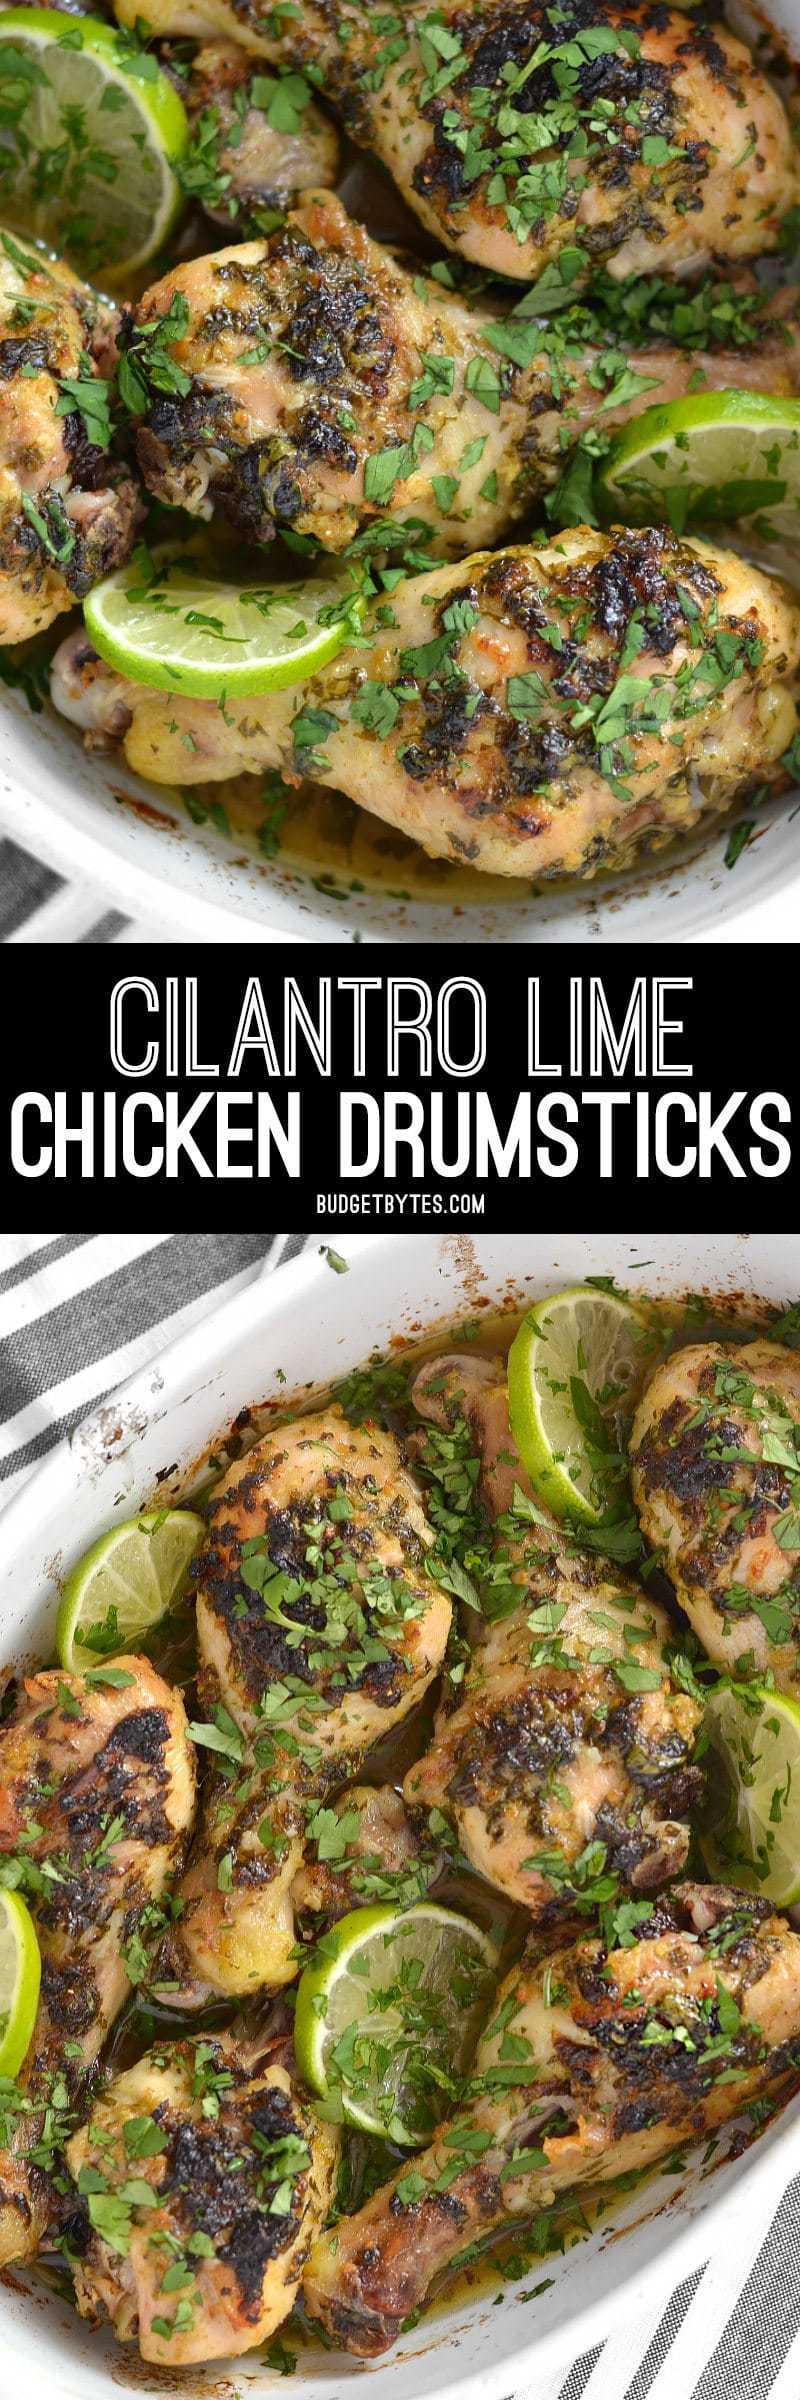 These garlicky Cilantro Lime Chicken Drumsticks are like a blast of summer to get you through those winter blues. Also great for the grill! BudgetBytes.com